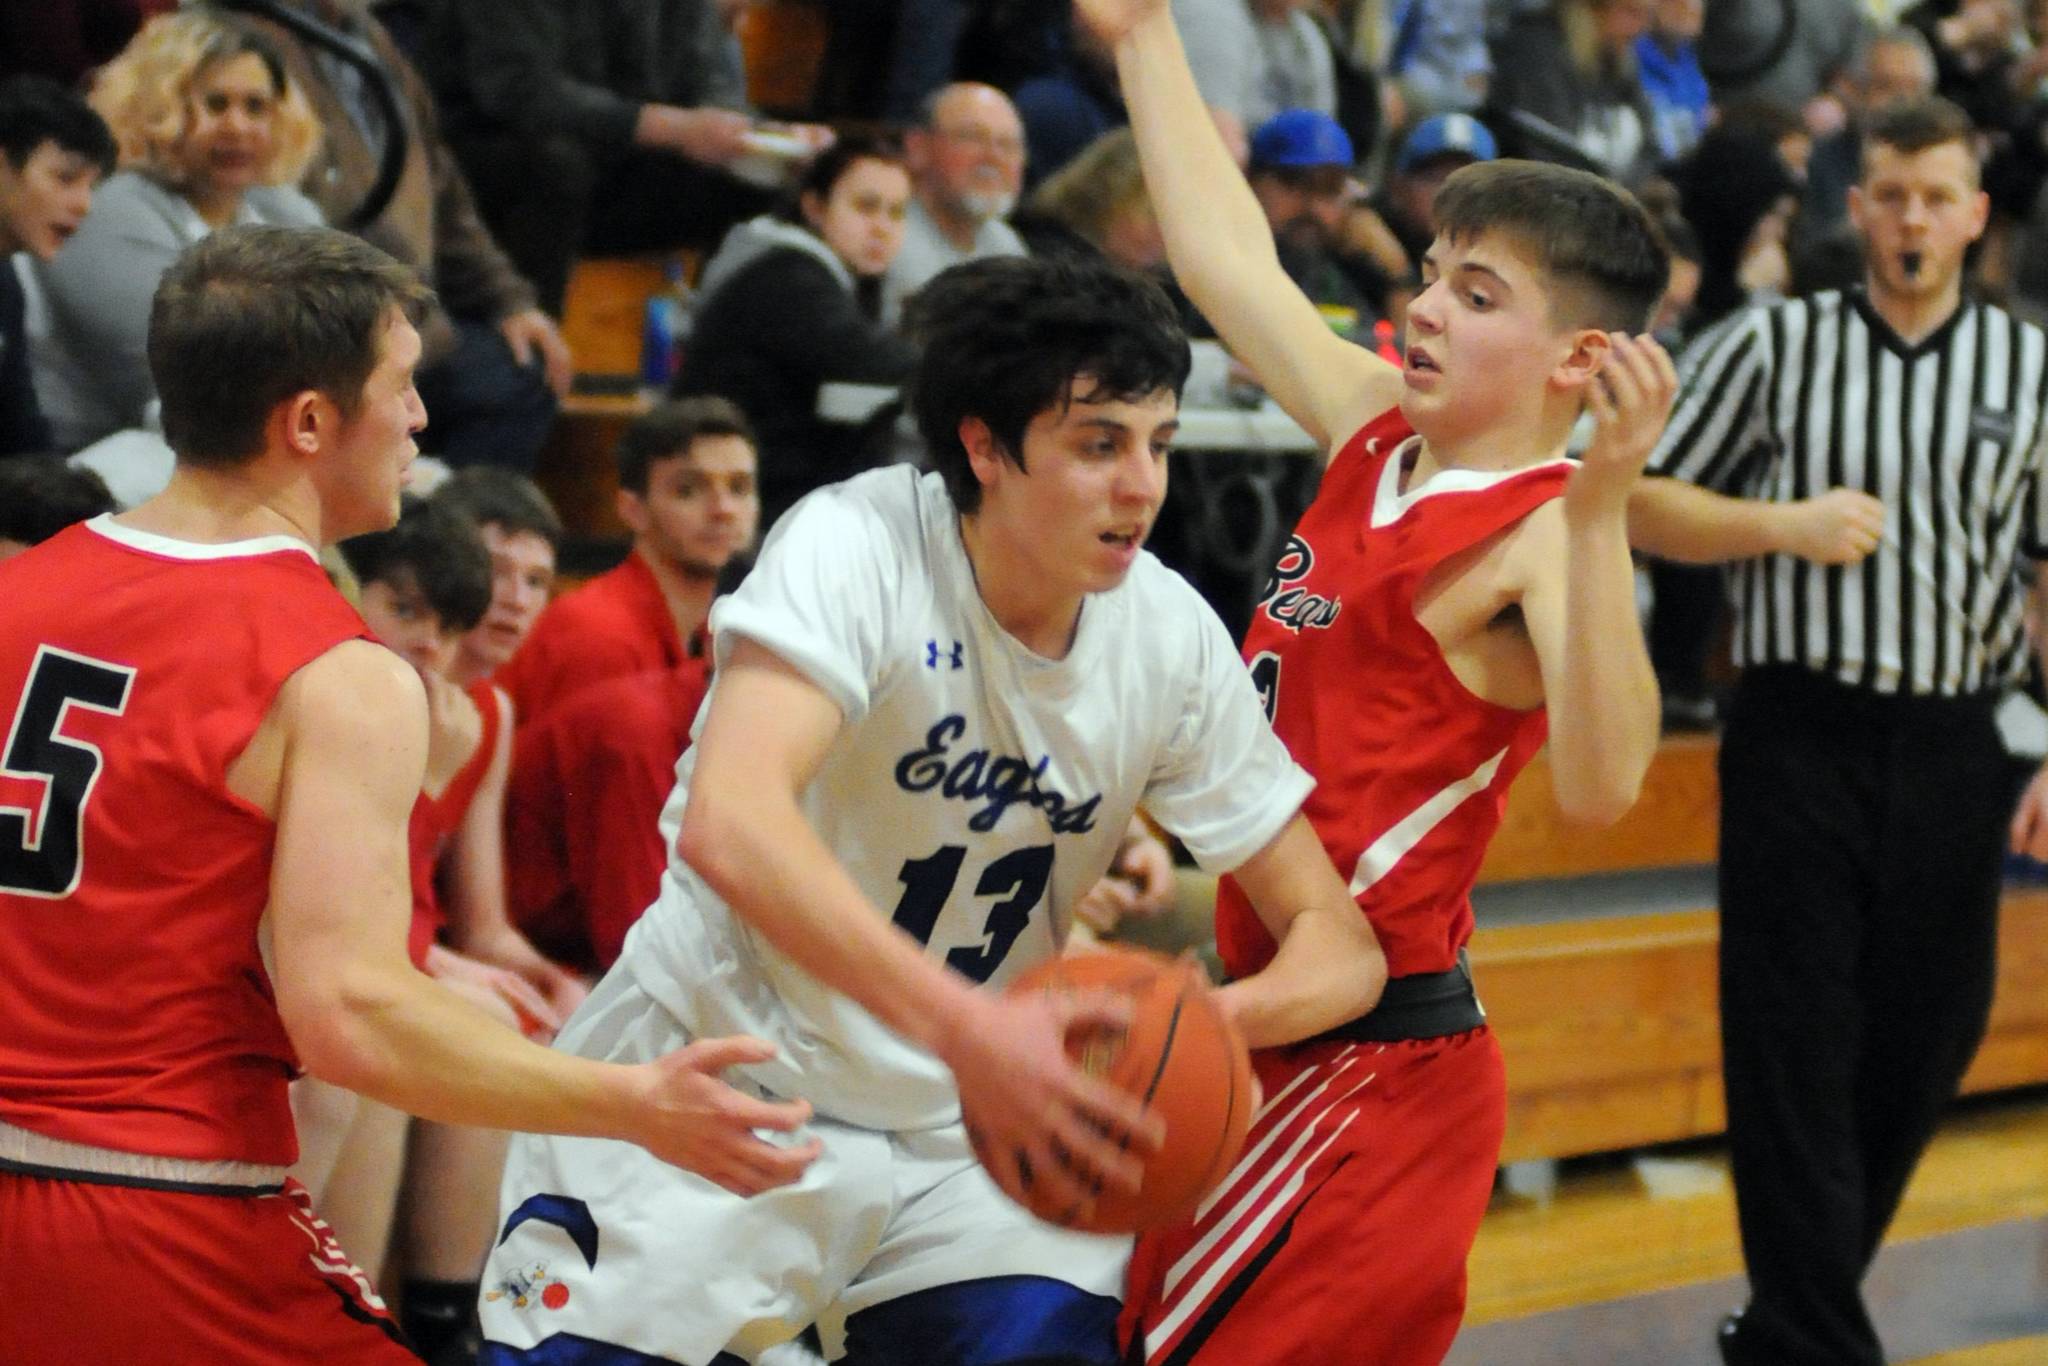 Thursday Roundup: Elma turnaround continues with win over Tenino